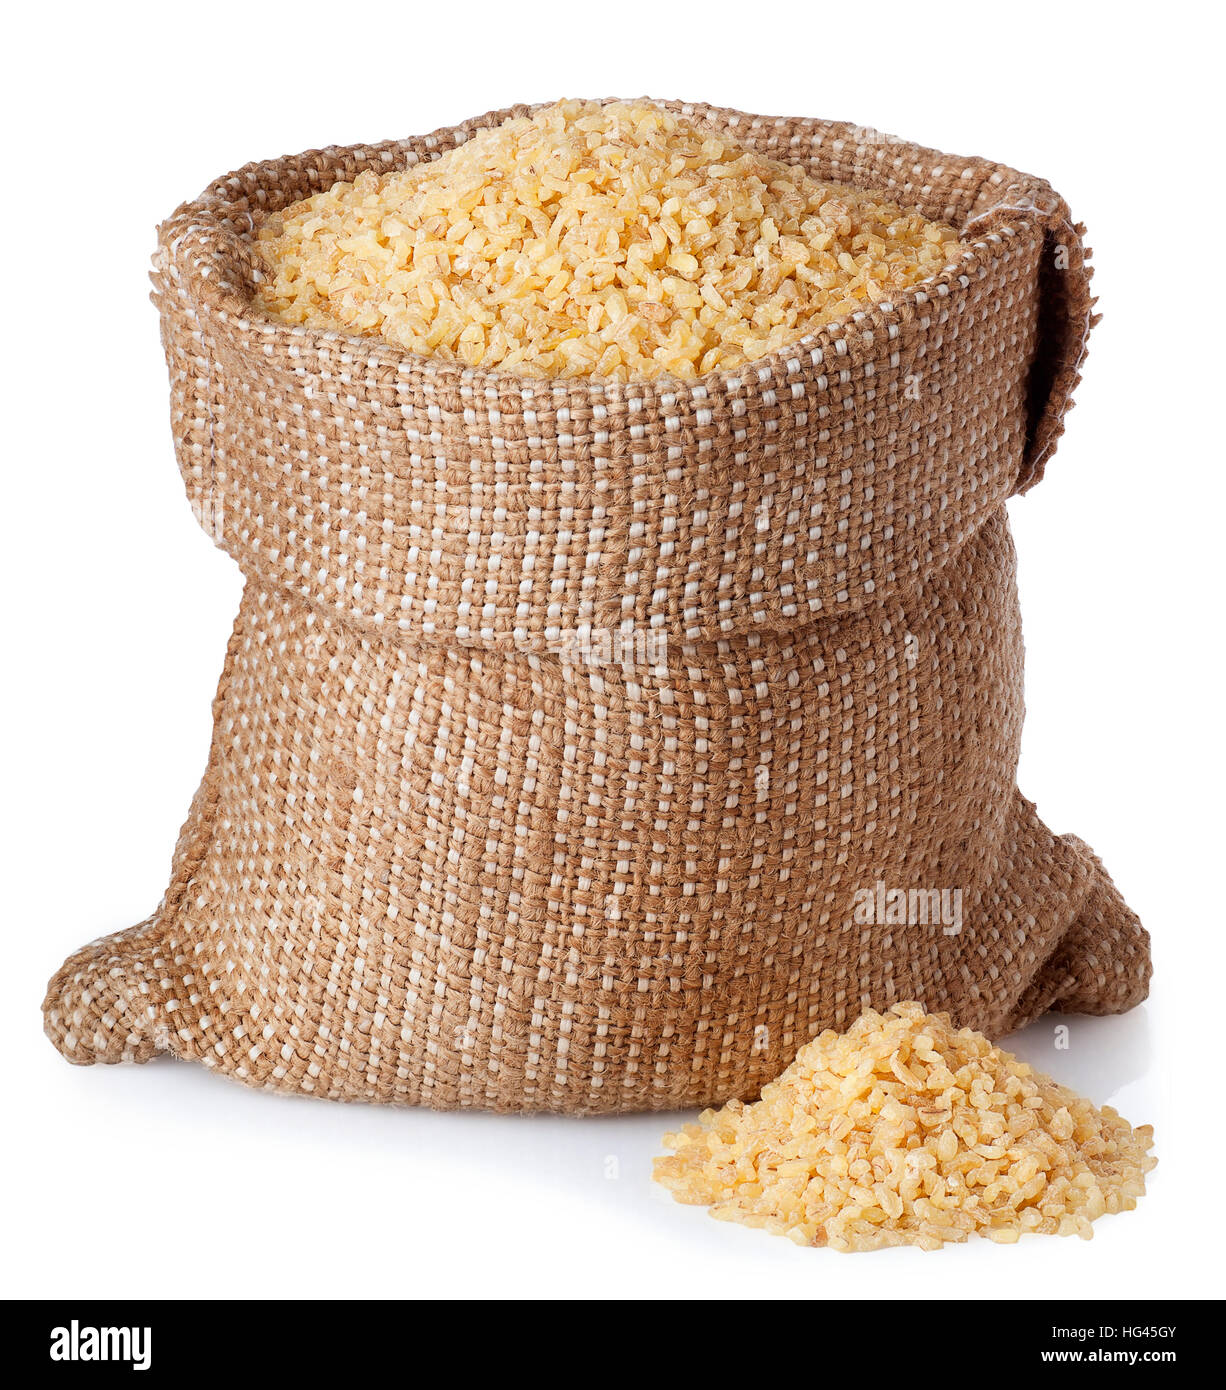 Bulghur or couscous in burlap bag with scattered heap isolated on white background Stock Photo